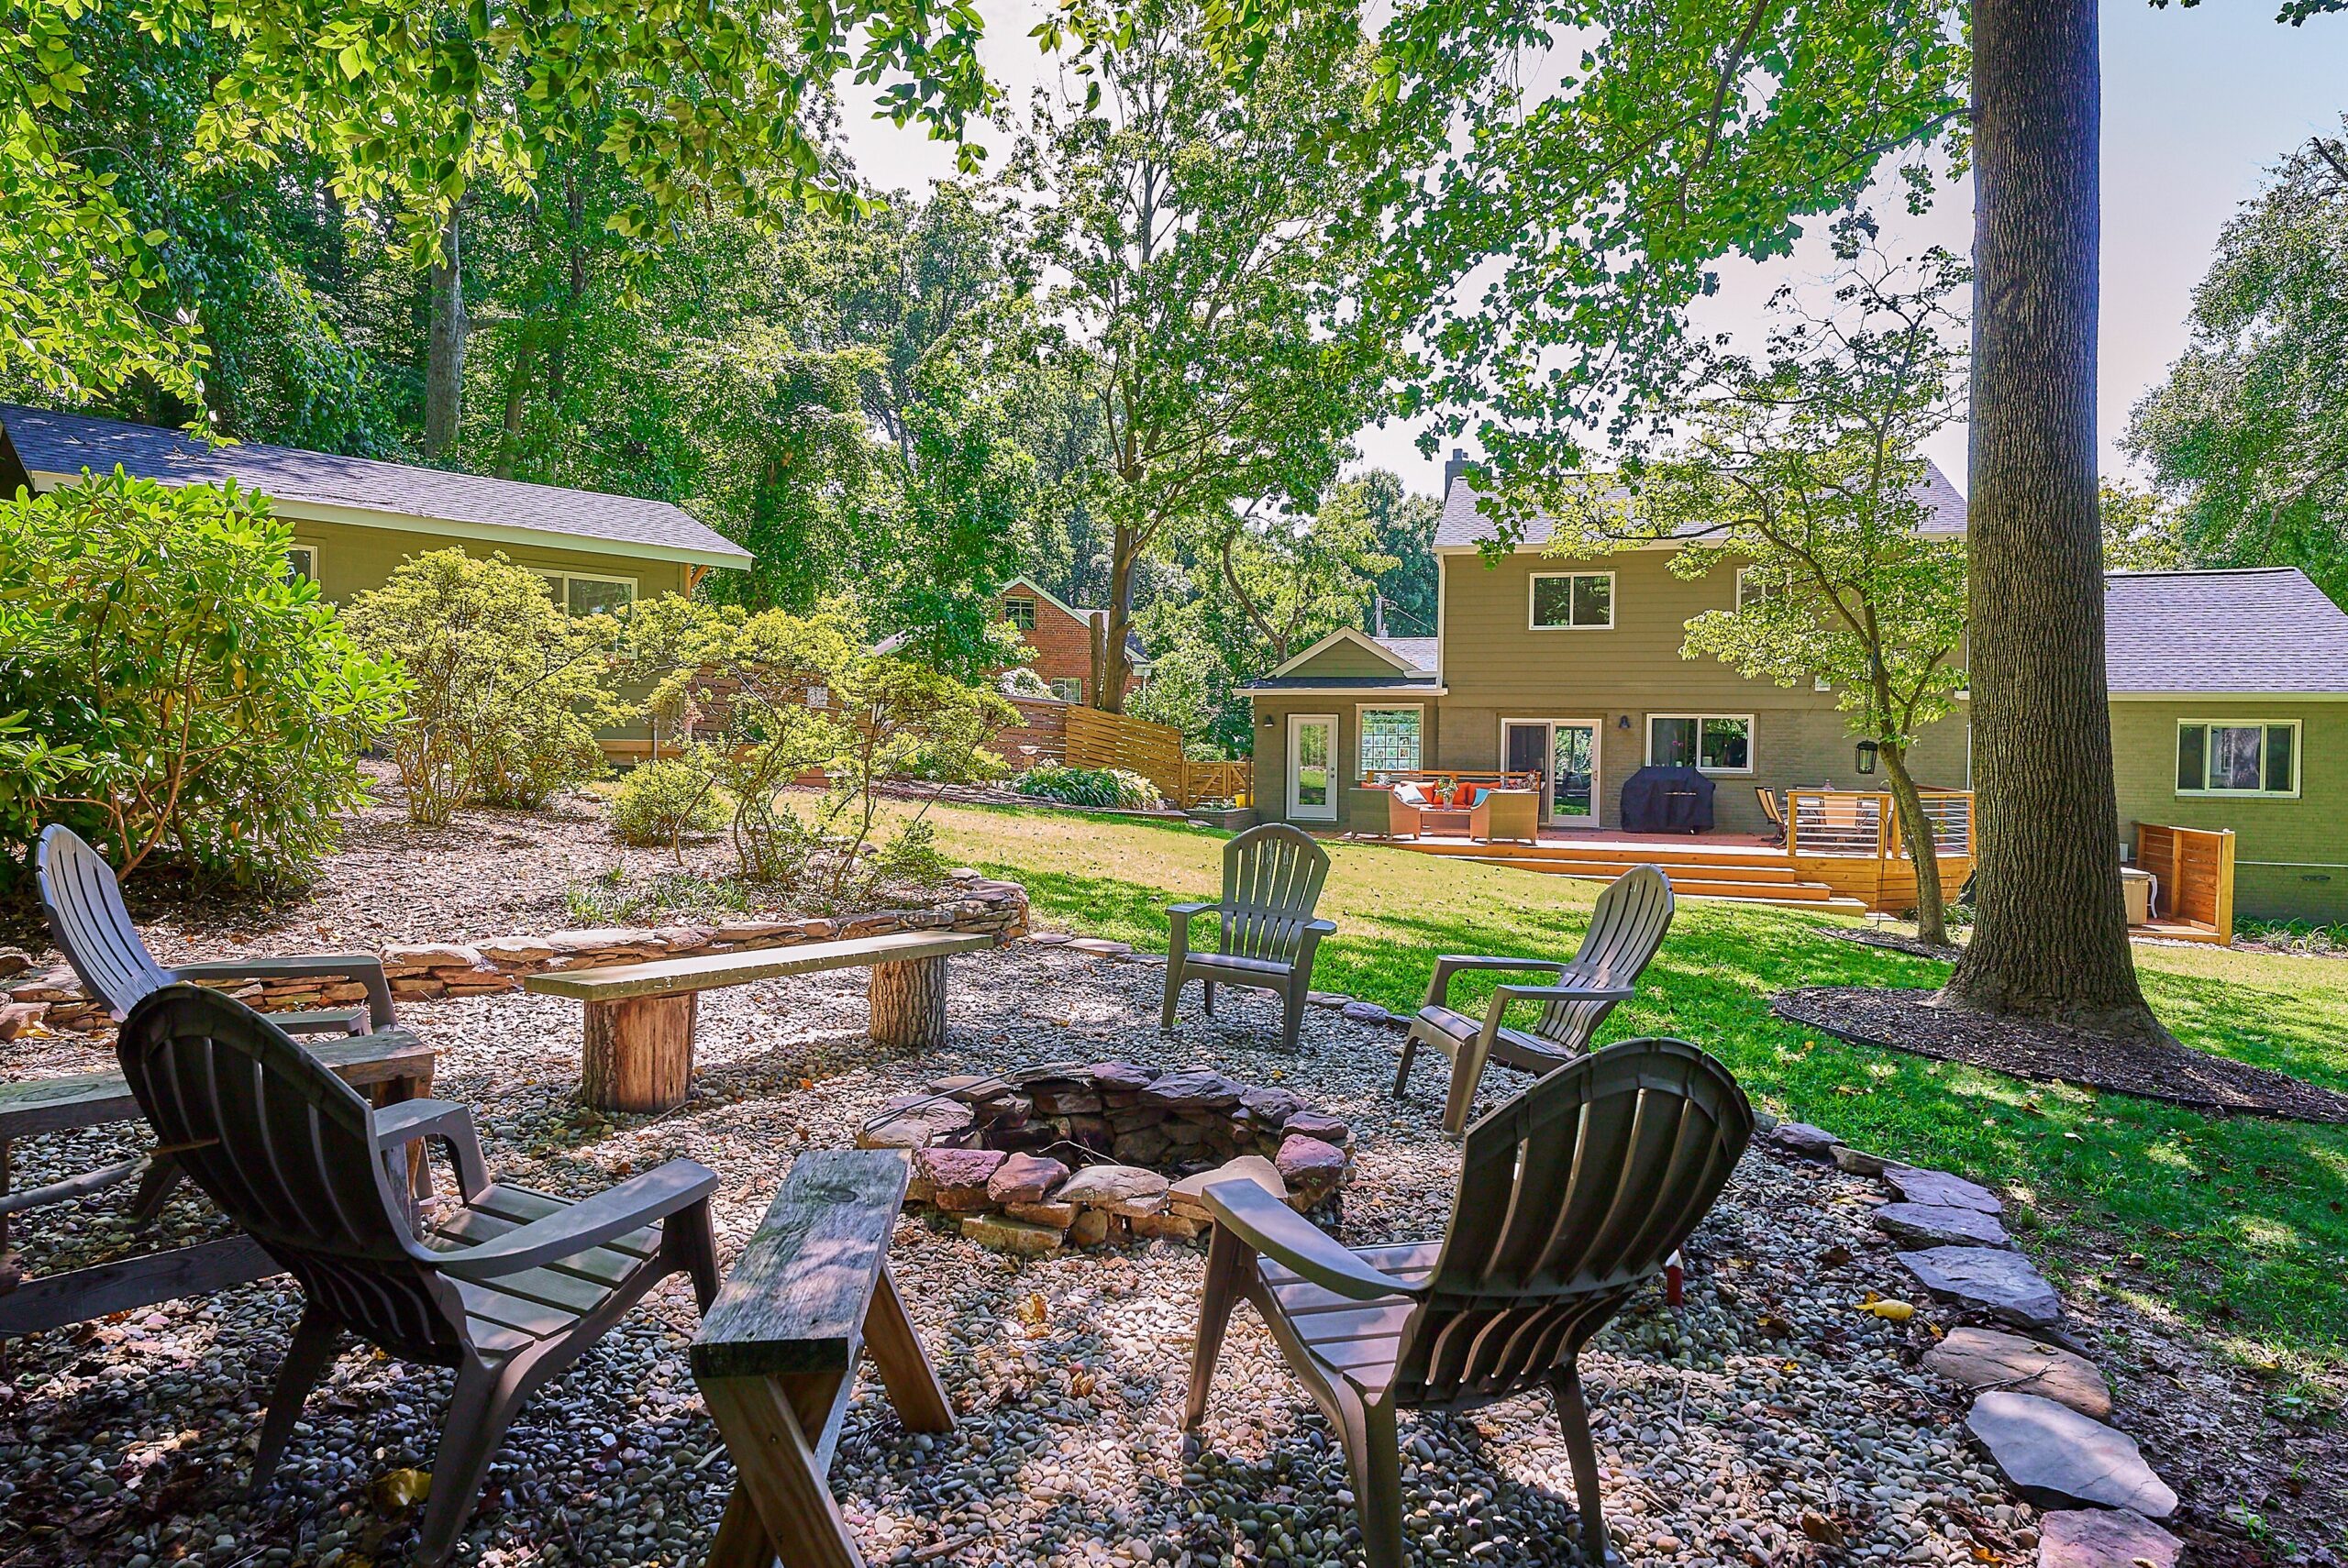 Professional photo of rear exterior of custom home in Falls Church, Virginia. Shows fire pit with several chairs in the foreground and grassy flat space in the background near the home.